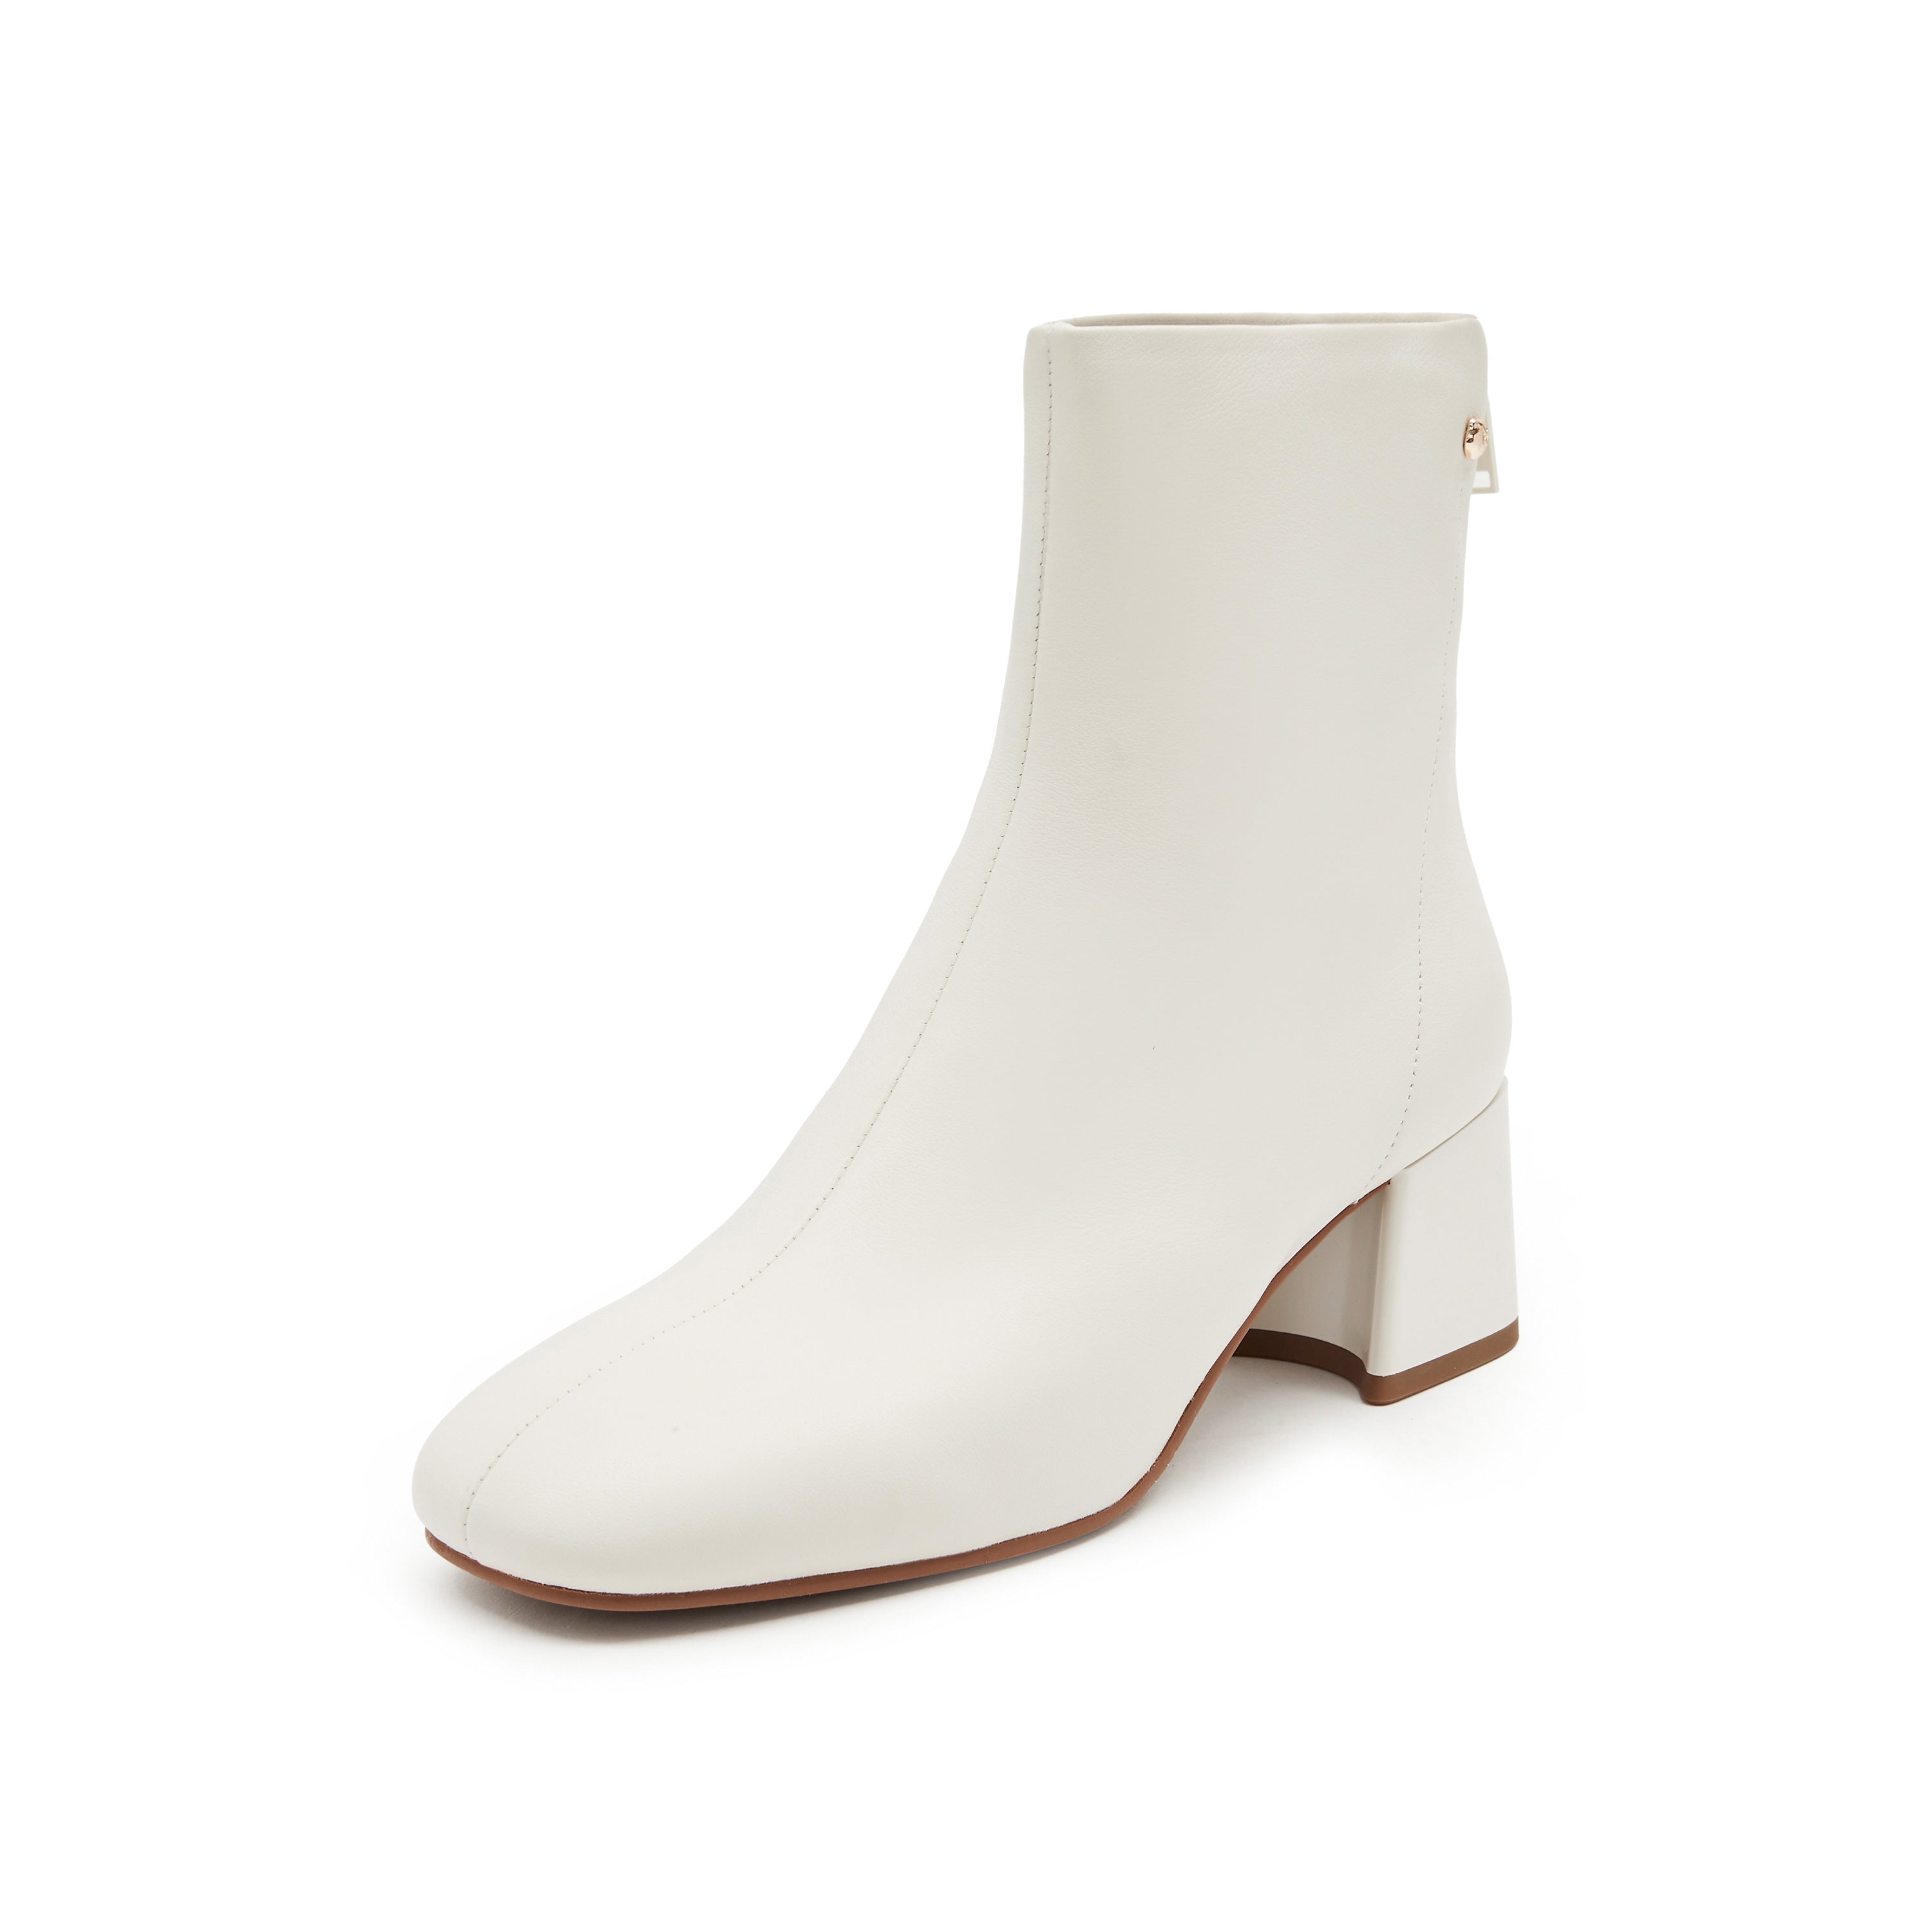 Beige Round Toe Leather Ankle Boots